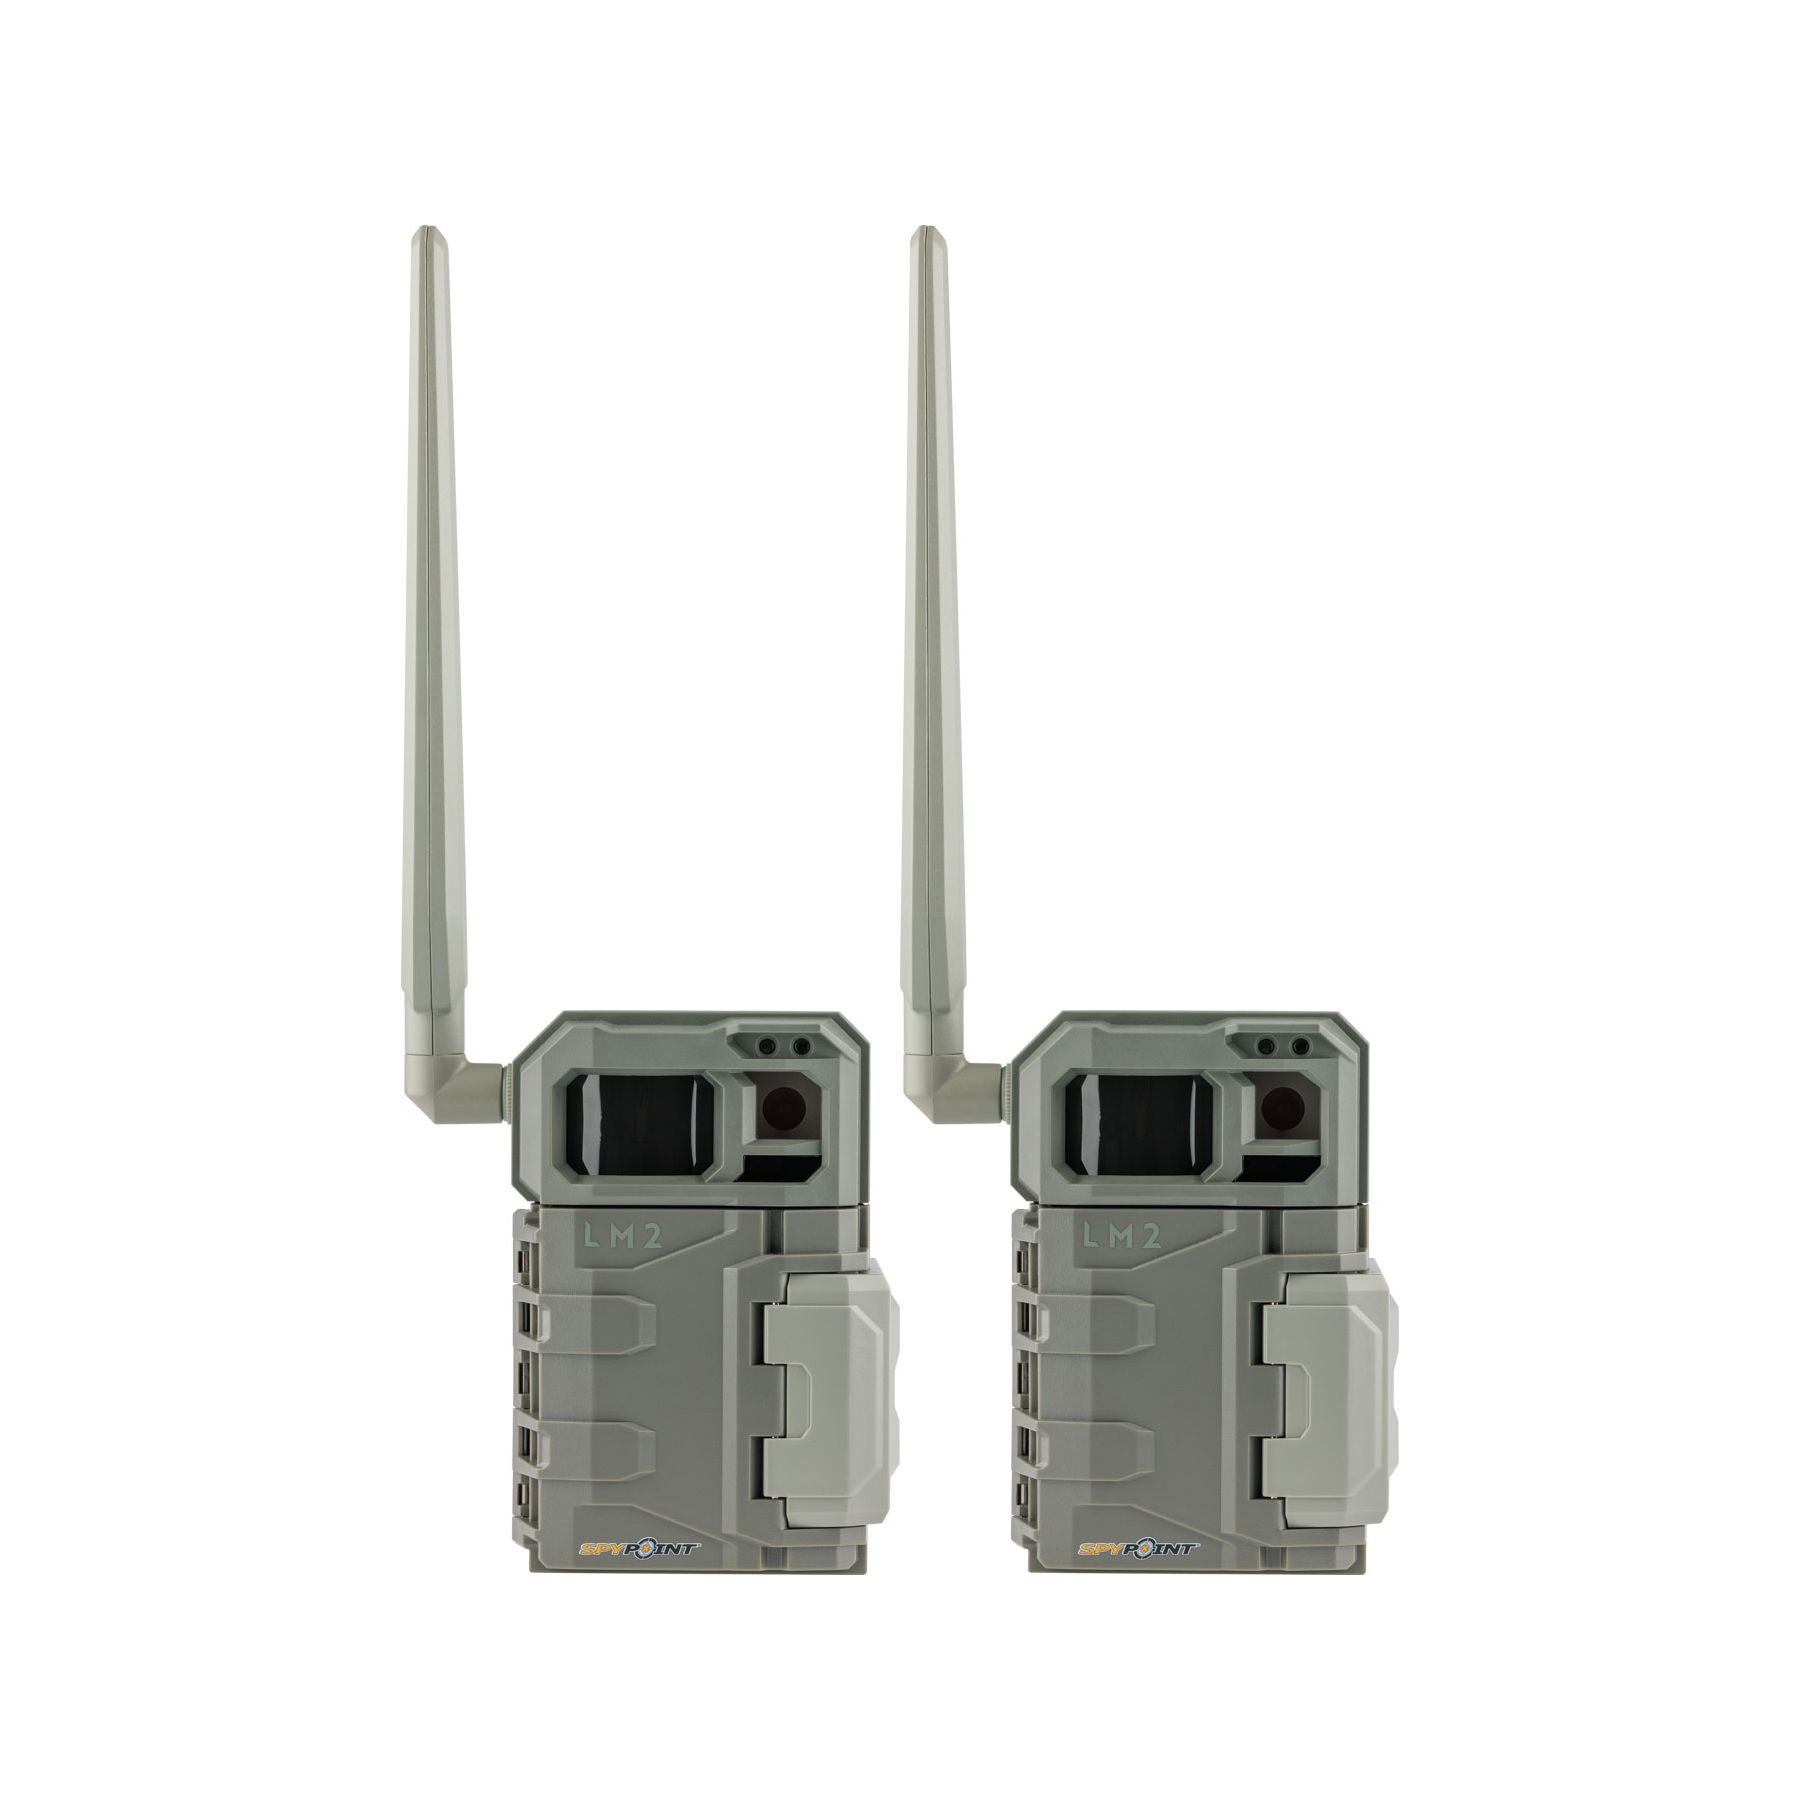 SPYPOINT LM2 - TWIN-PACK